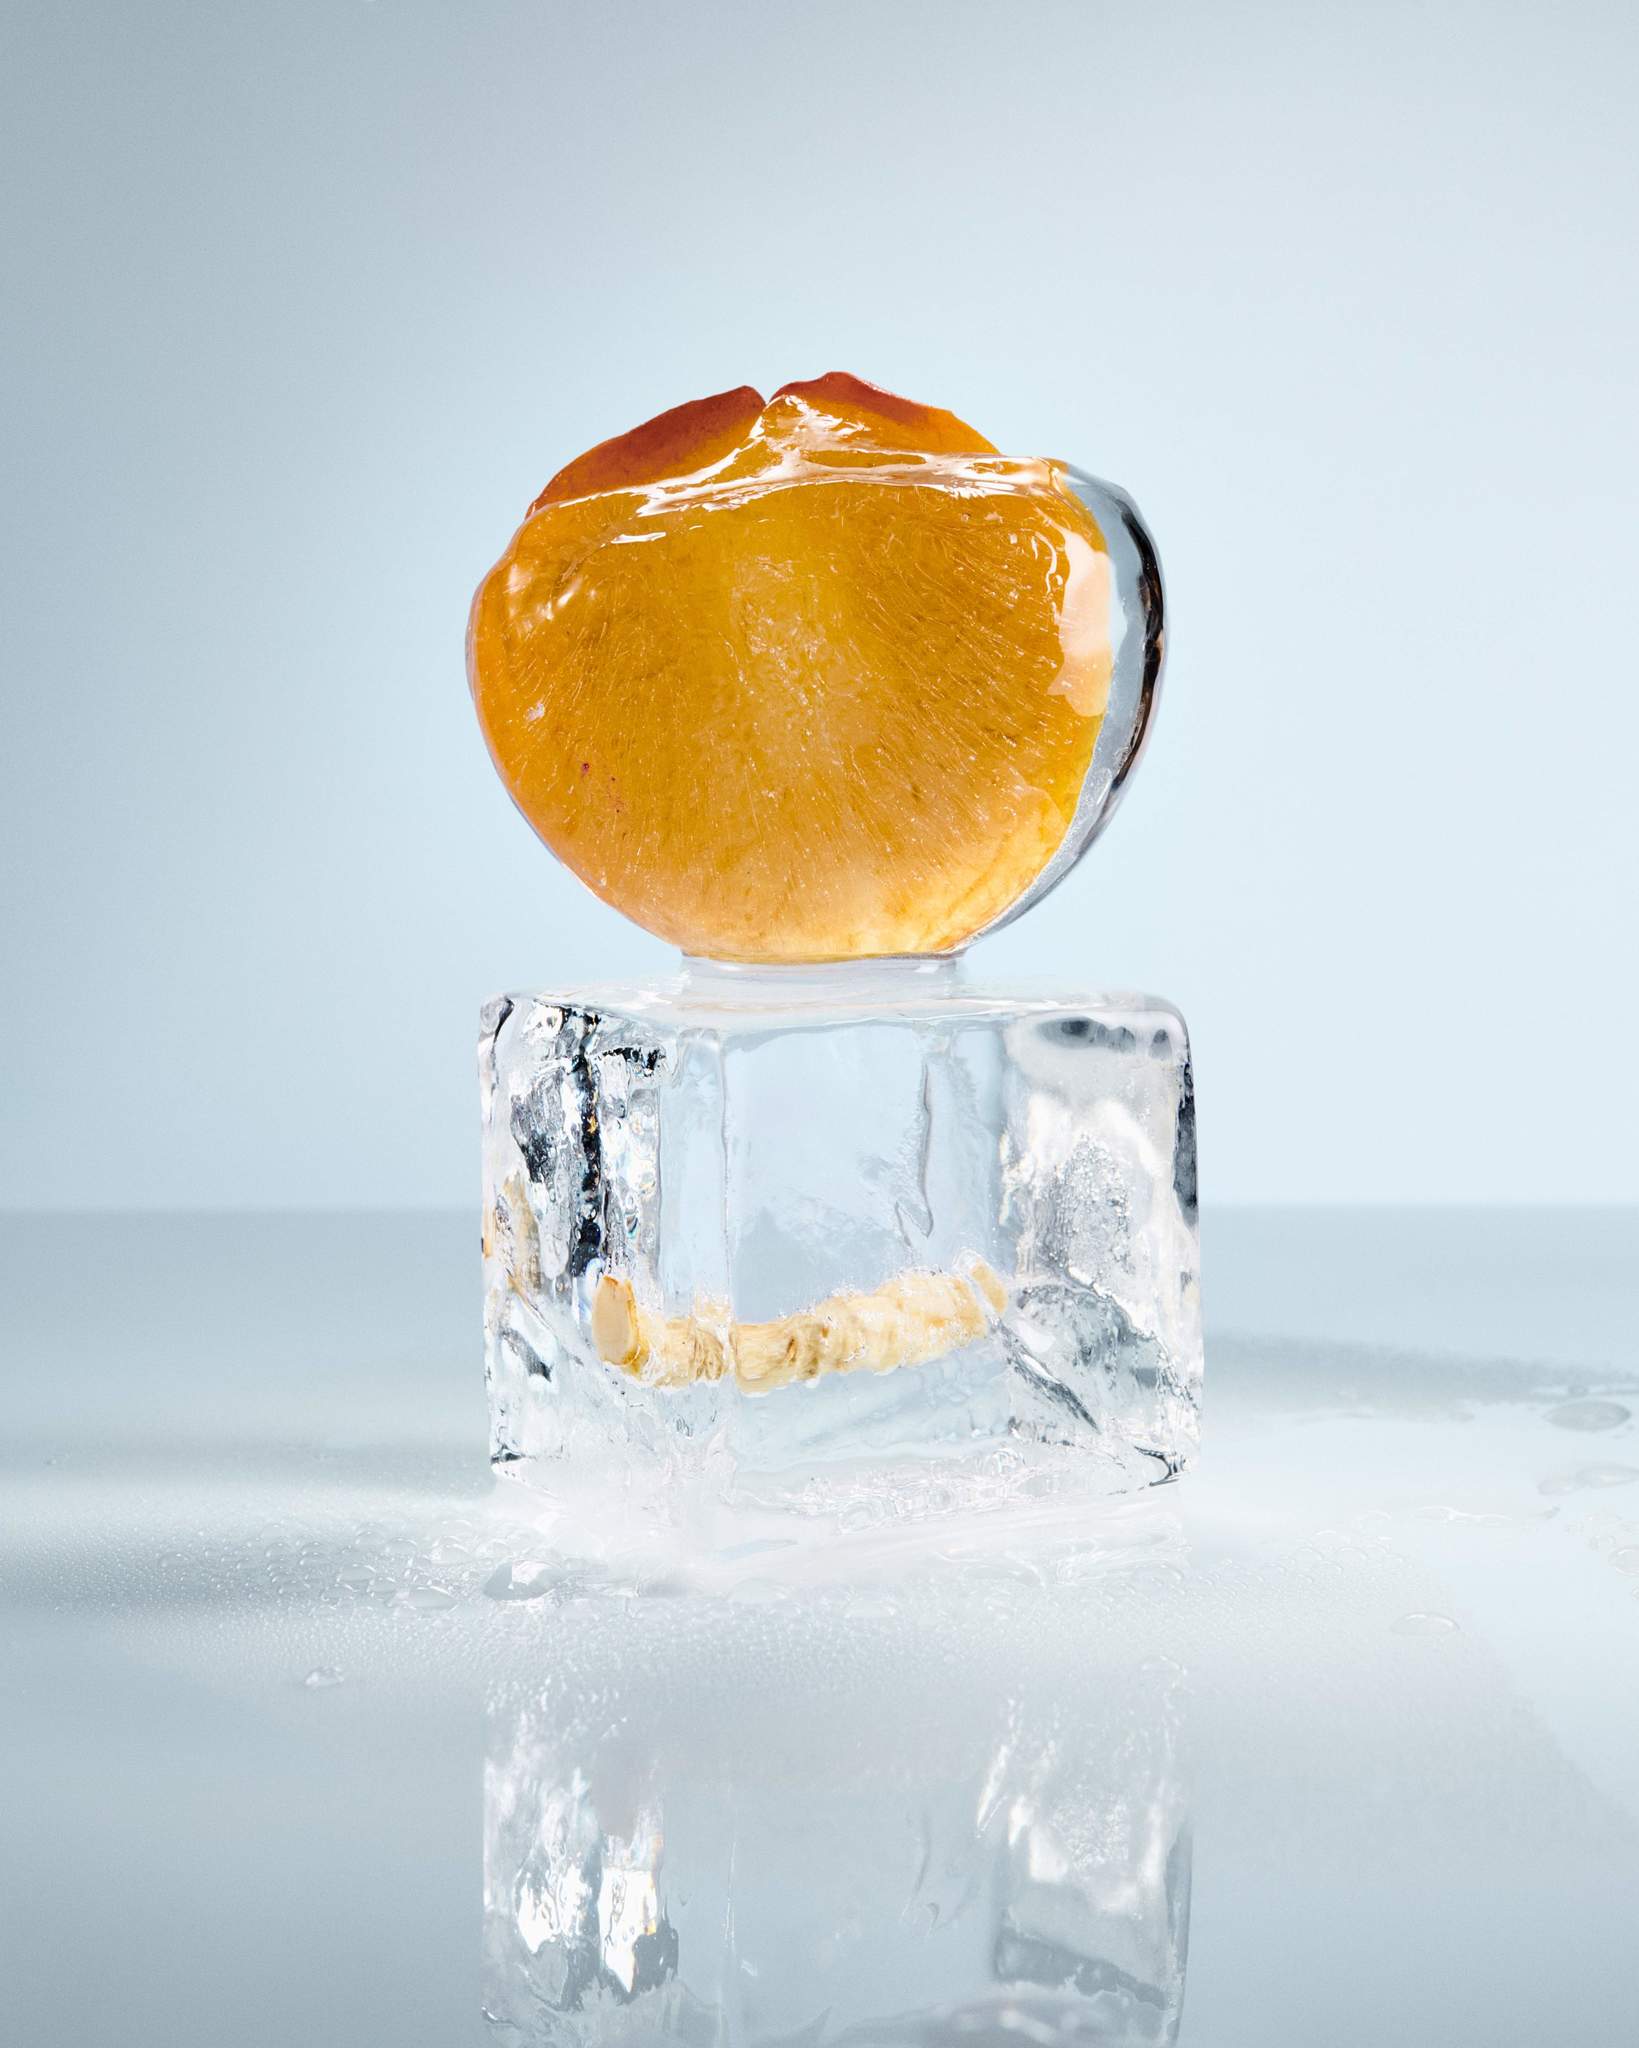 Apricot in ice on top of an ice cube